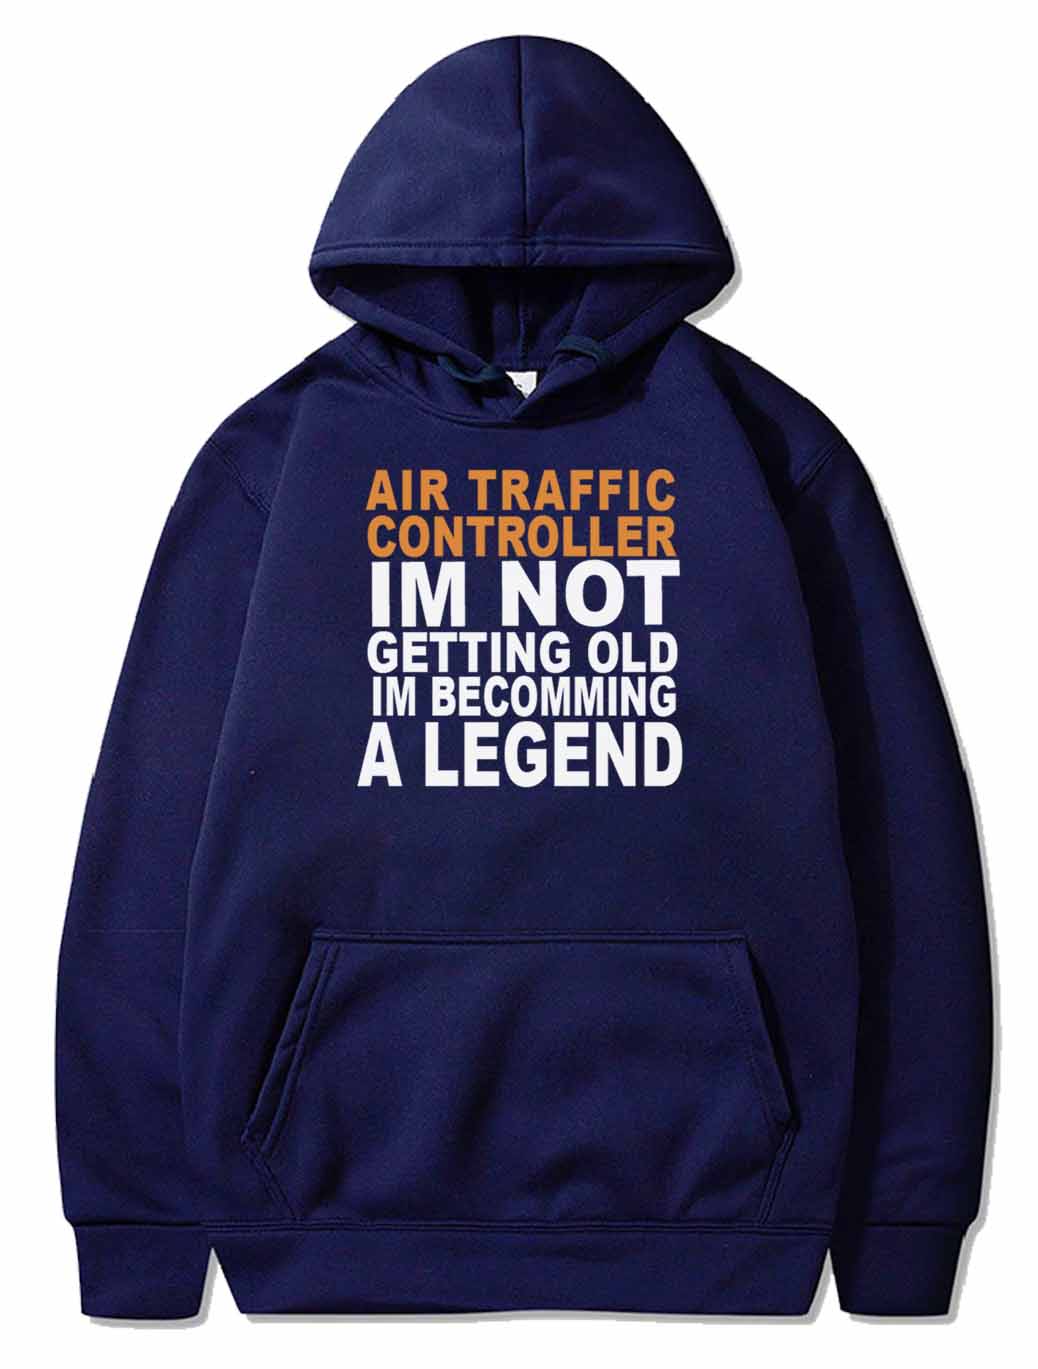 Not Getting Old - Only Become A Legend Gift ATC PULLOVER THE AV8R